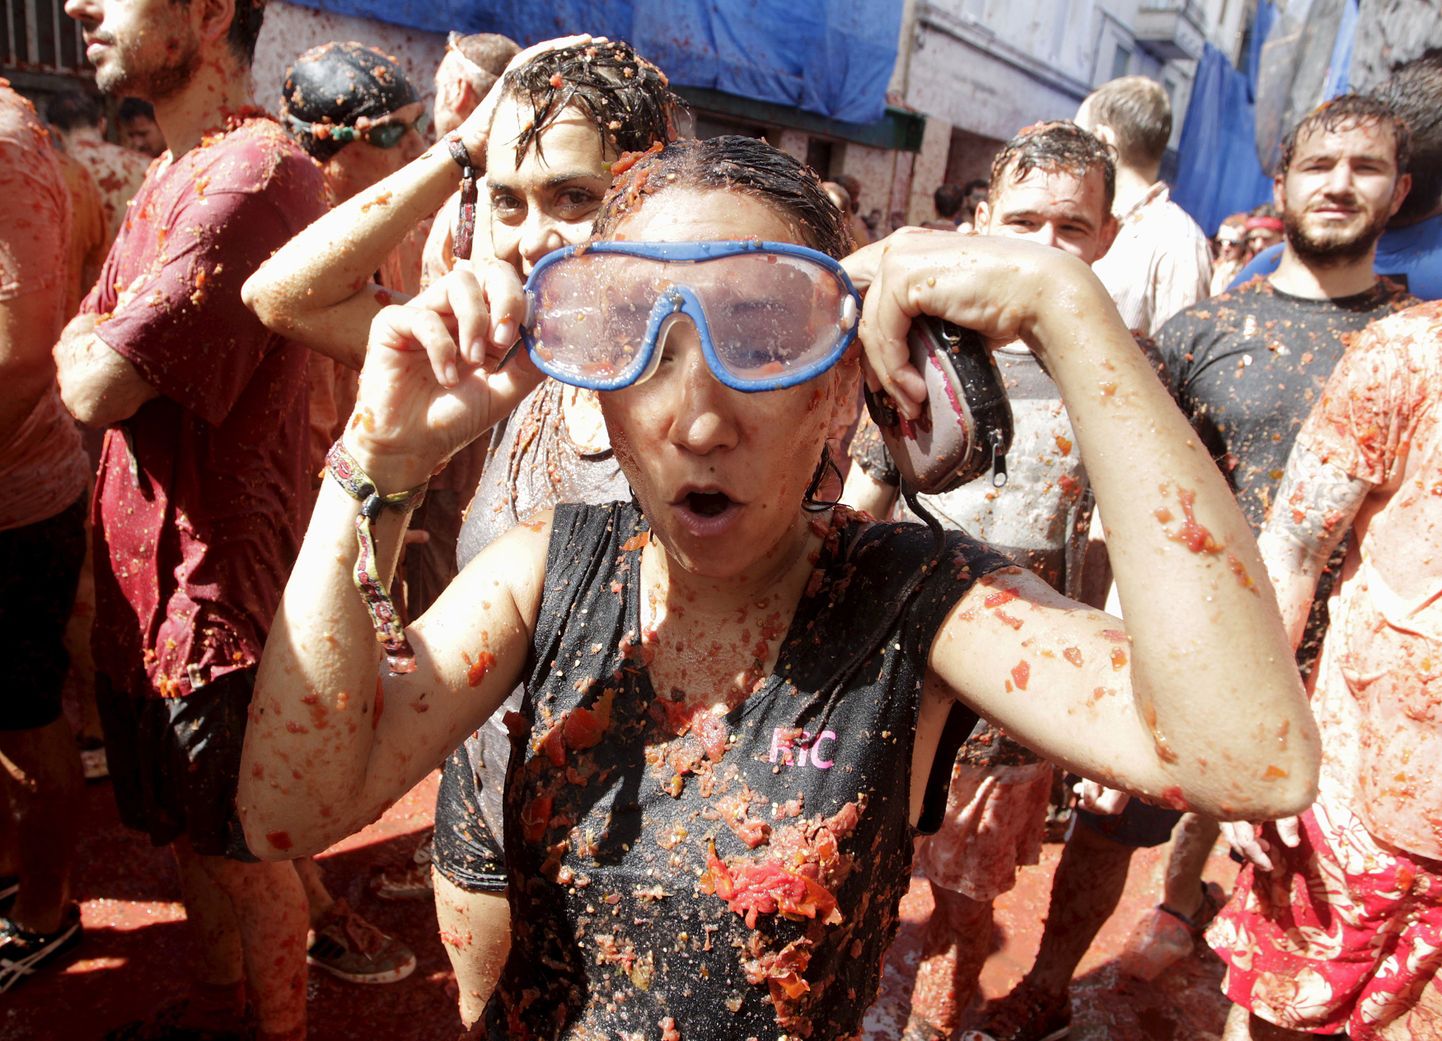 Revelers leave the "battlefield" after the annual "Tomatina" (tomato fight) in Bunol, near Valencia, Spain, August 26, 2015. Tens of thousands of festival-goers hurled 170 tonnes of over-ripe tomatoes at each other on Wednesday to celebrate the 70th anniversary of the massive food fight in the small village of Bunol in eastern Spain. REUTERS/Heino Kalis